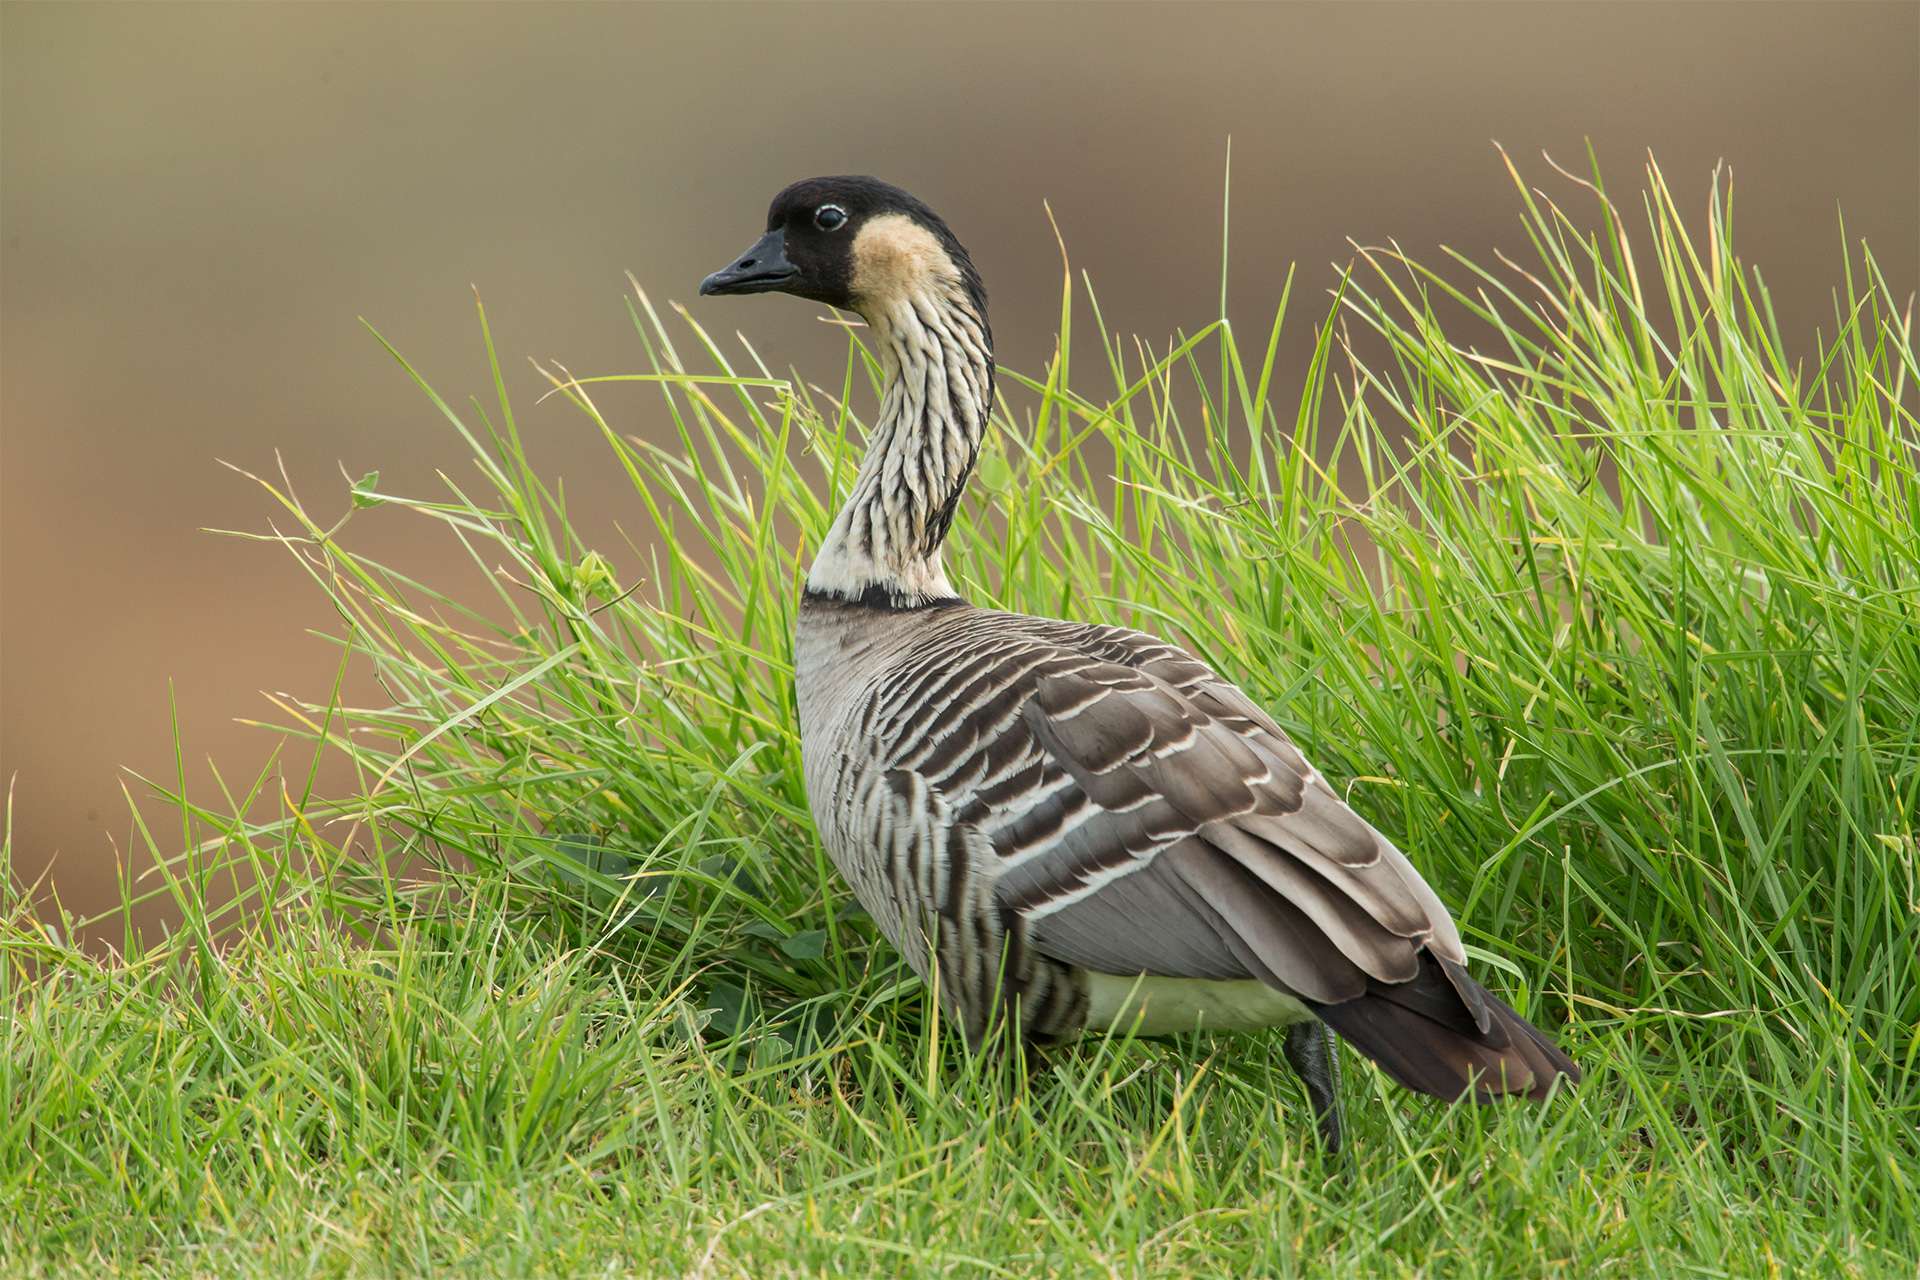 the rare and endangered Hawaiian goose or Nene, in the wild